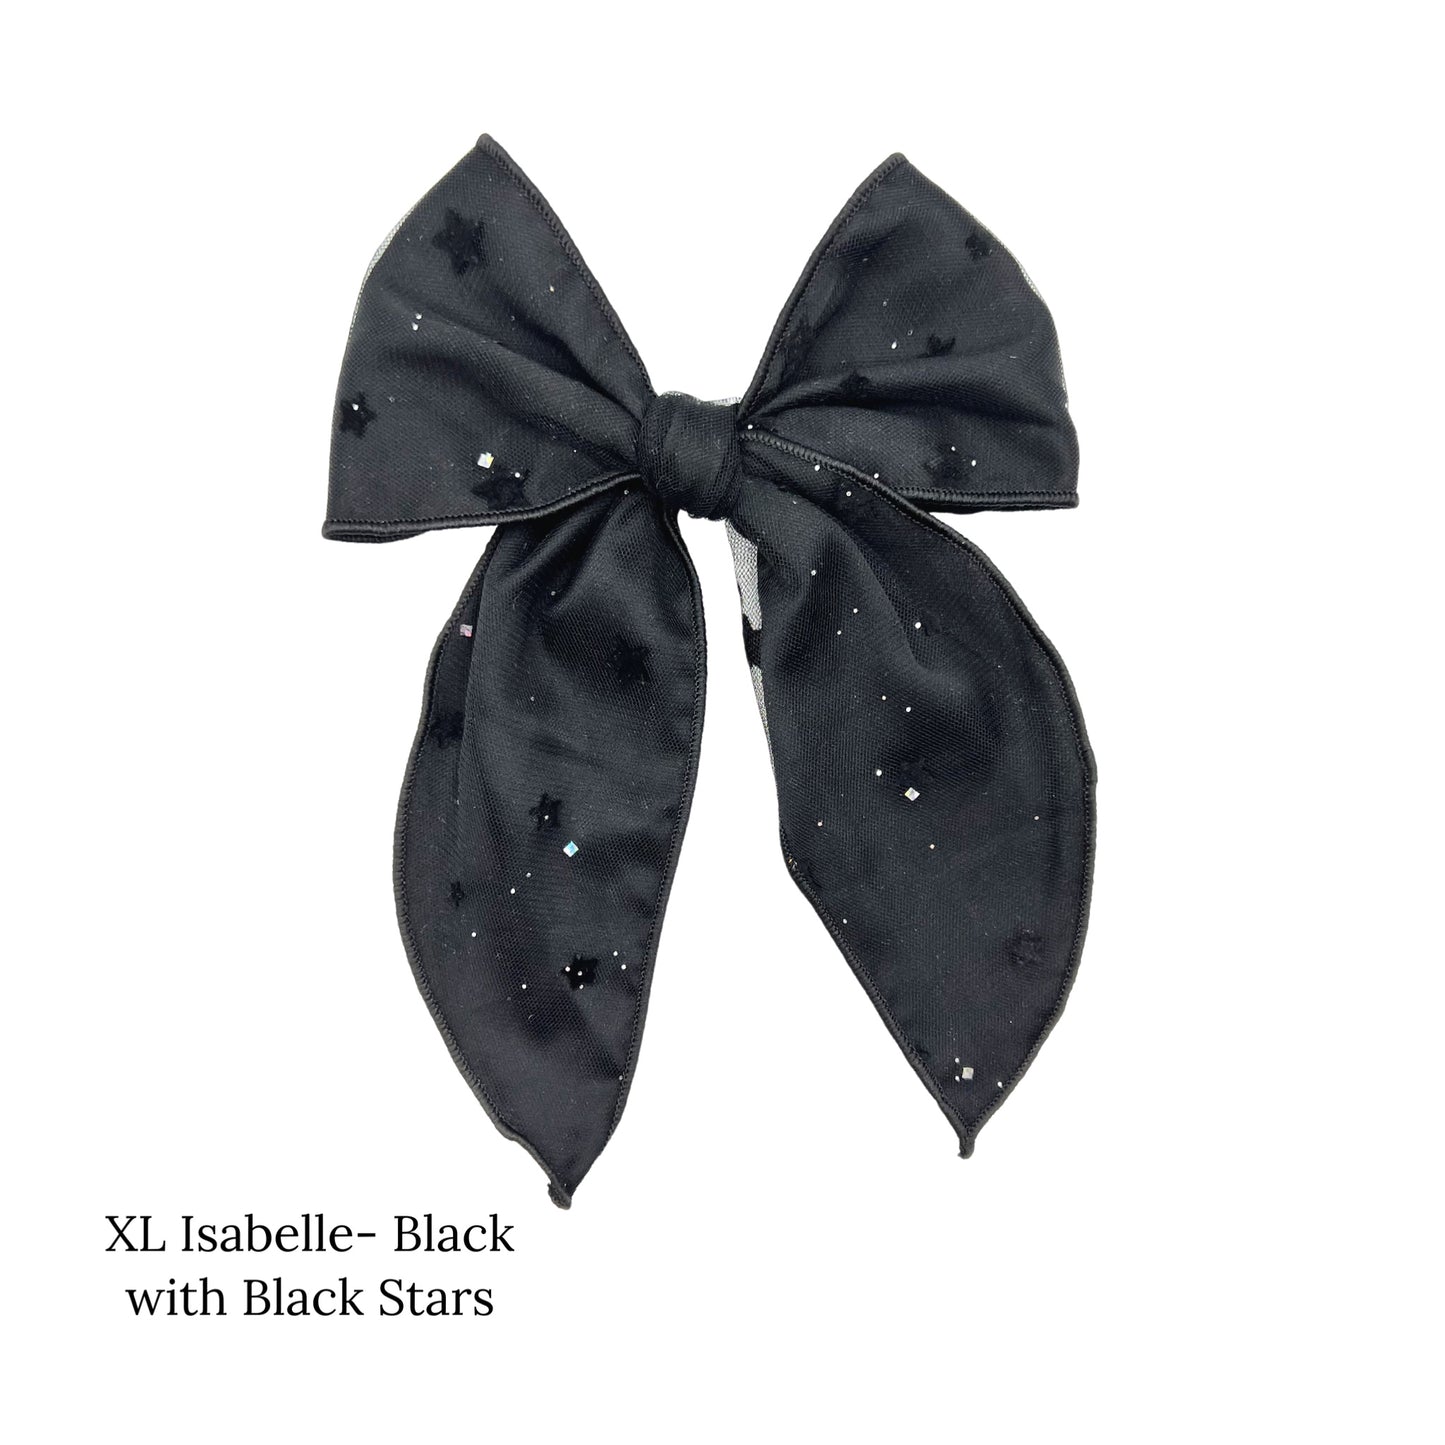 Large black tulle bow with sparkles and stars